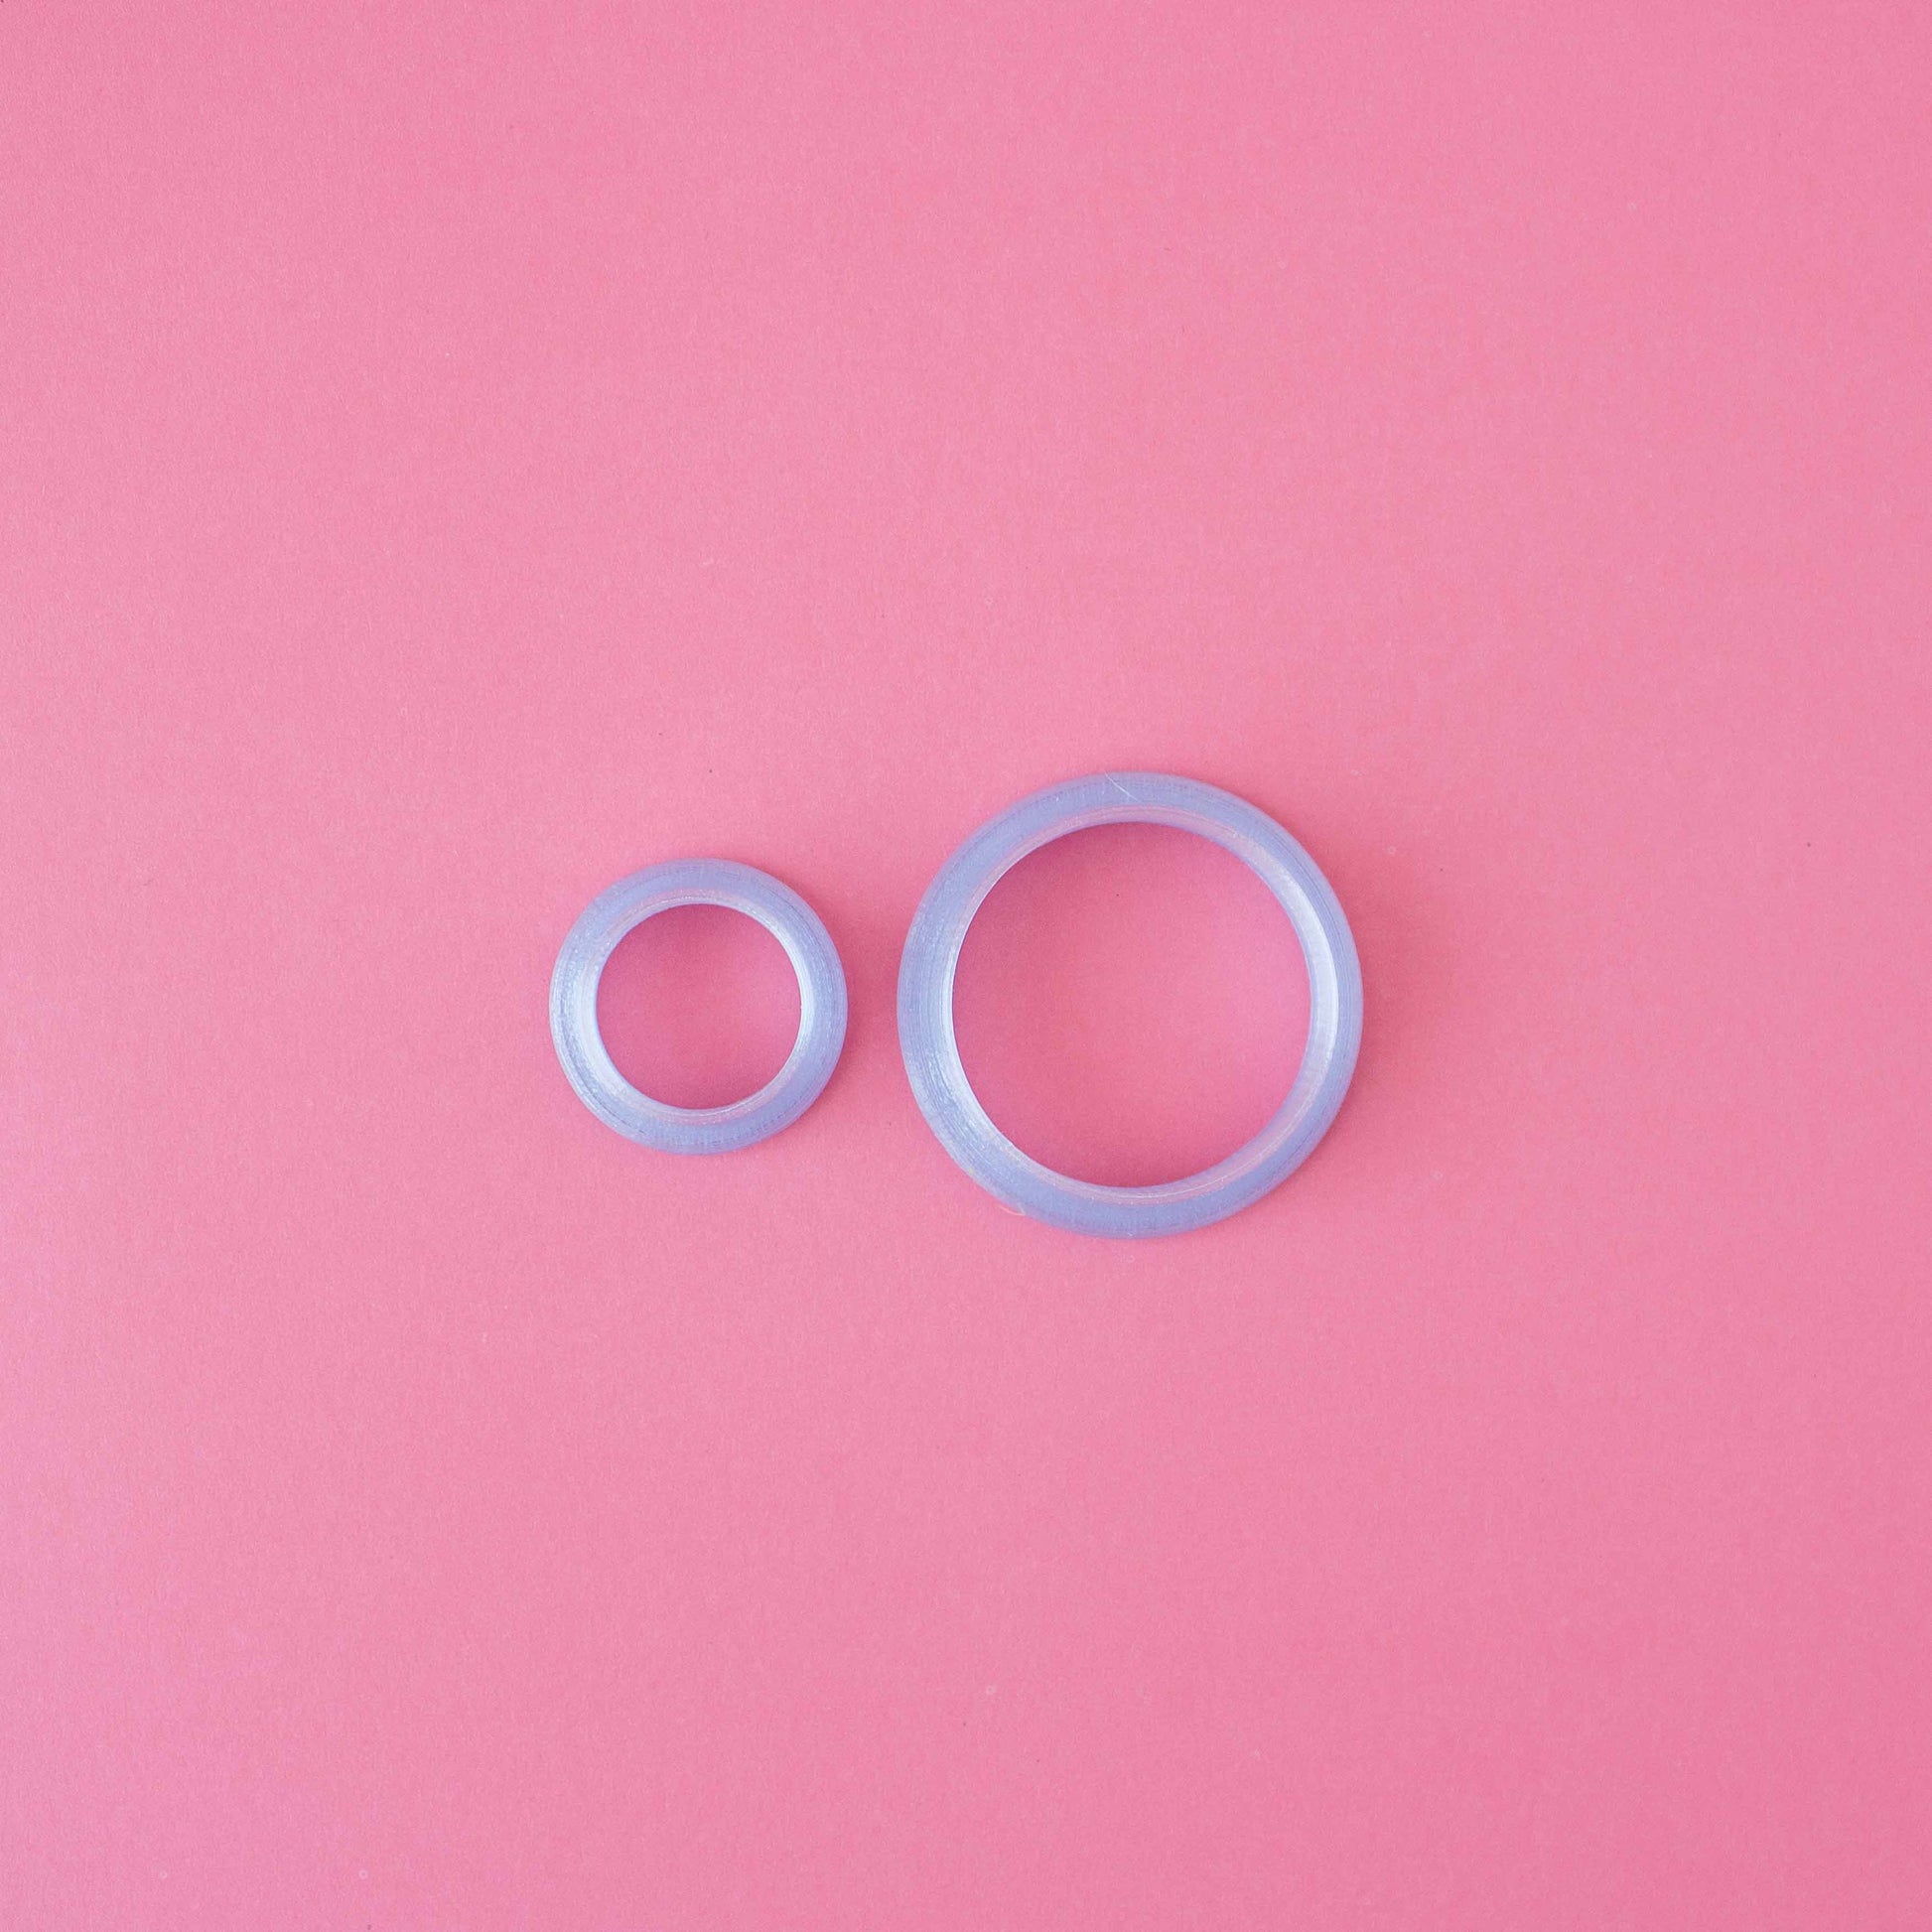 Two different circle polymer clay cutter sizes in a pink background.